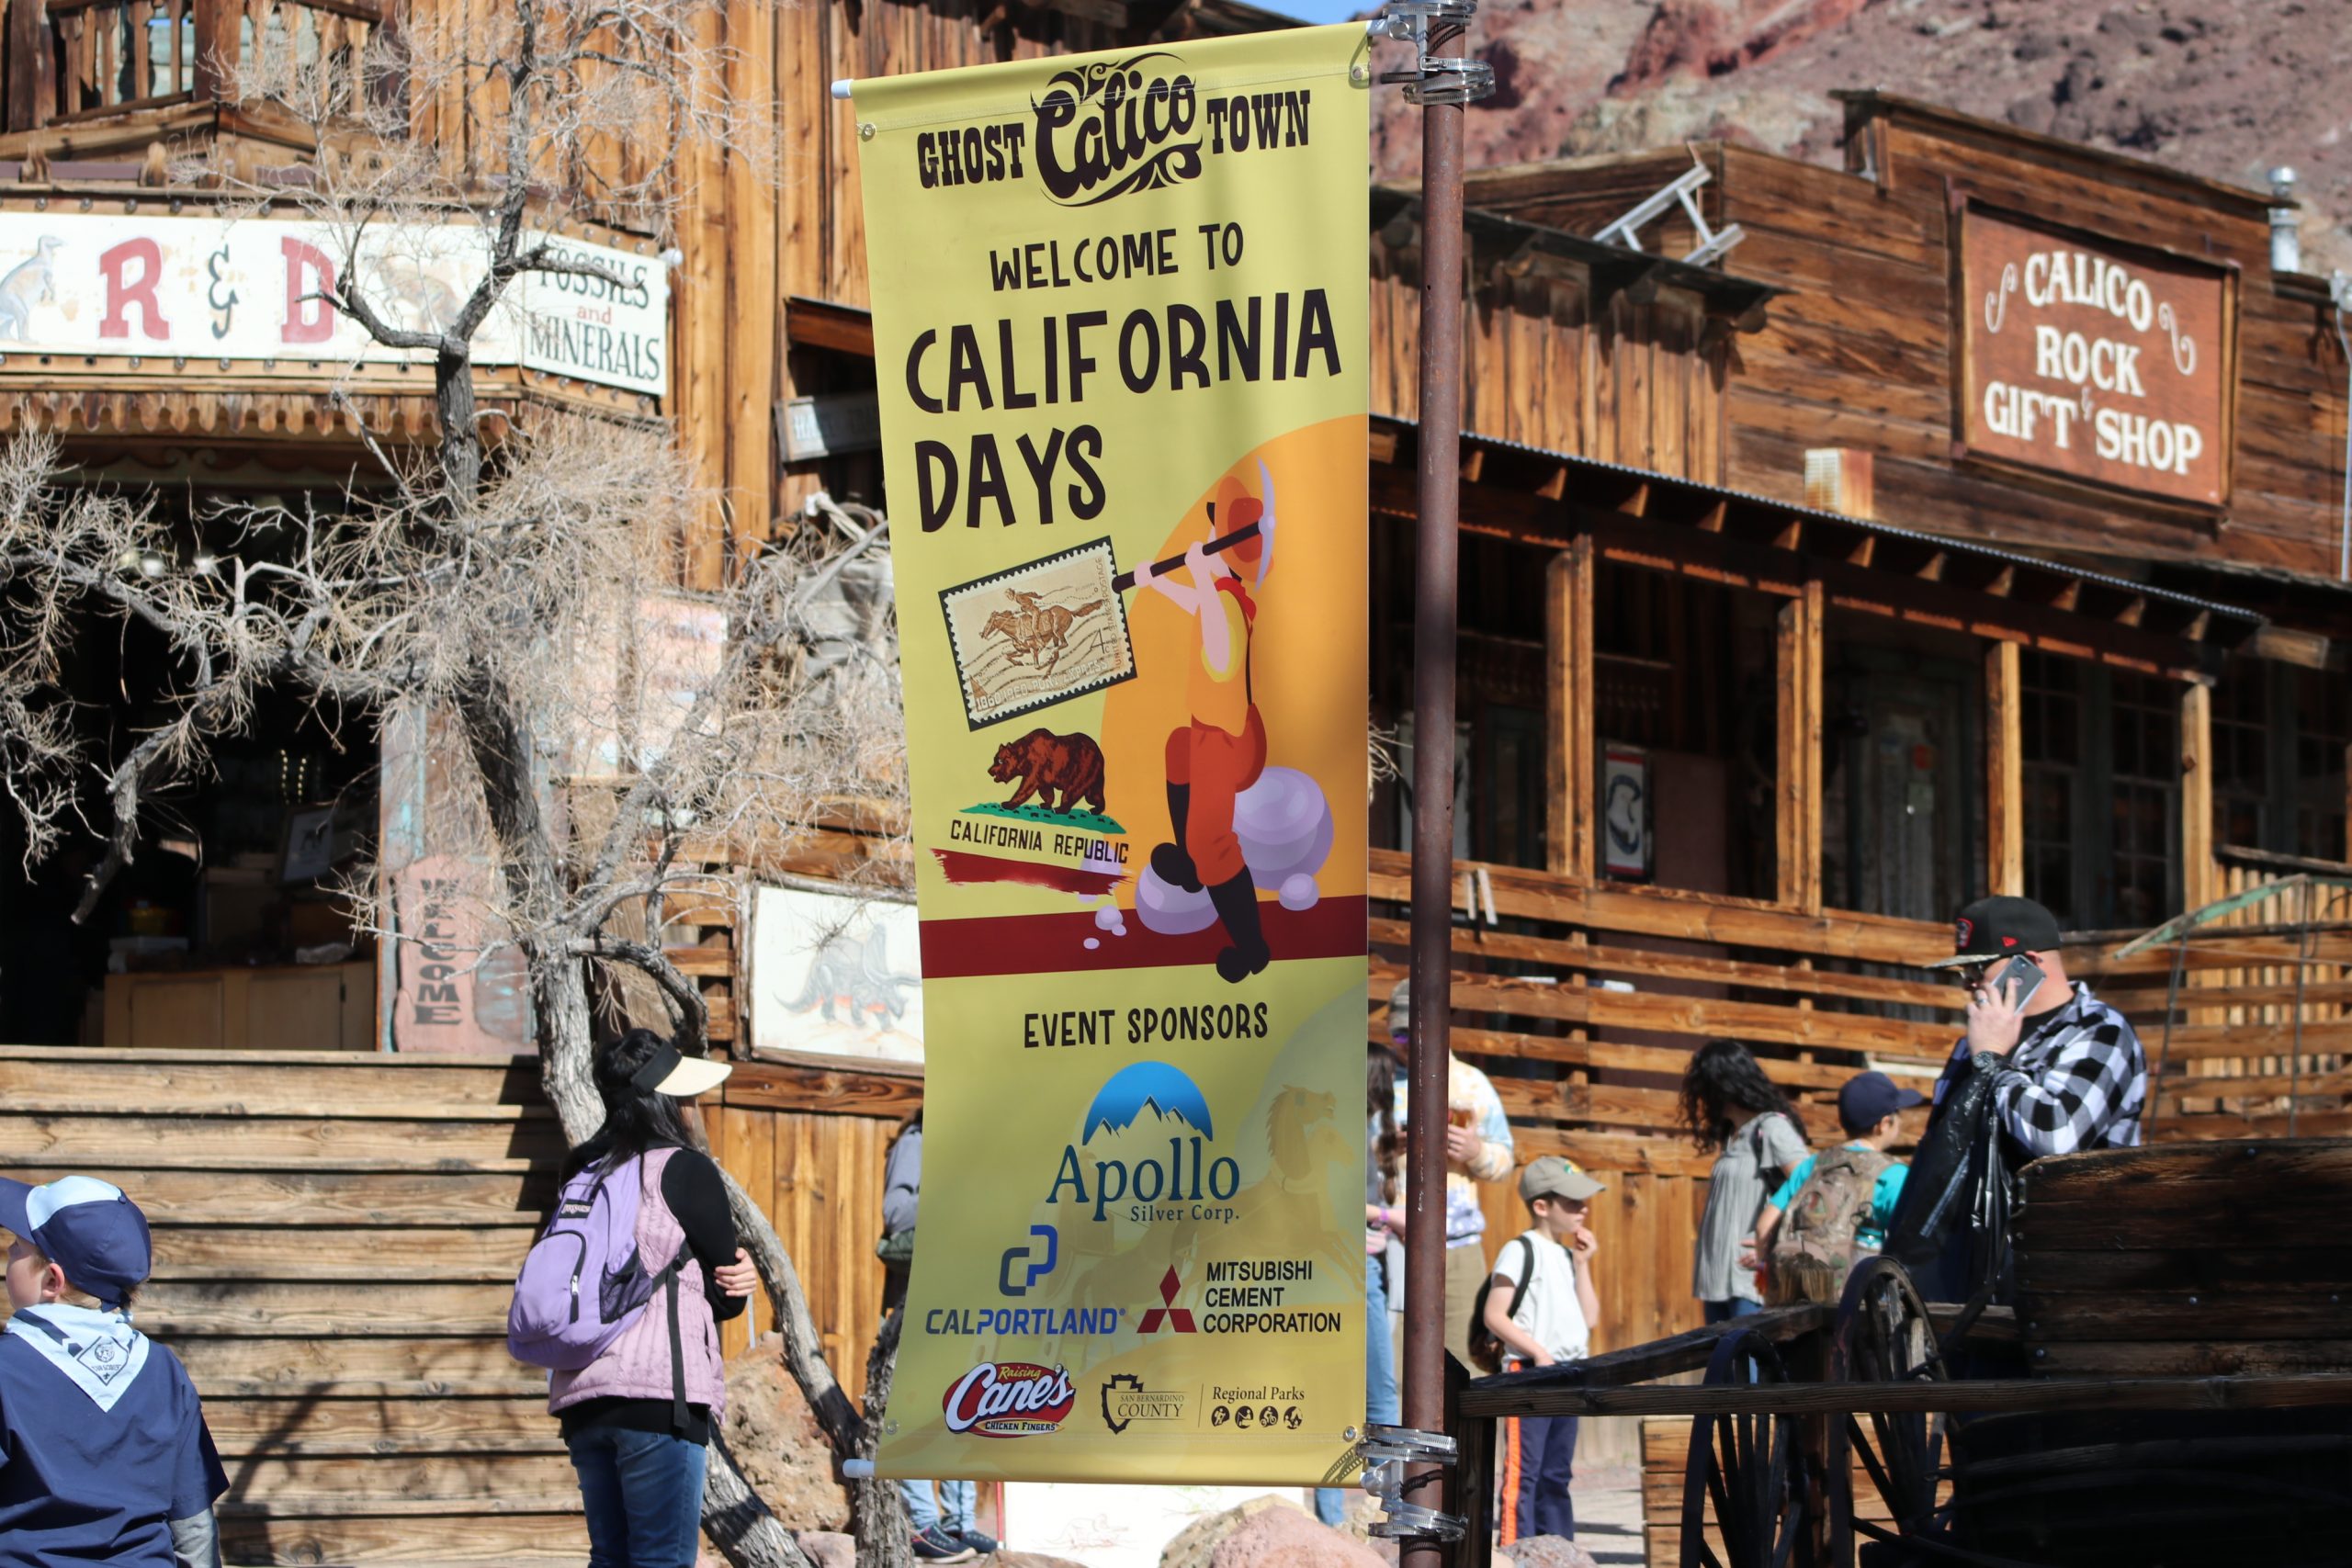 A wide photo of the California Days banner hanging in the middle of Calico Ghost Town with people walking by in front of the R&D Fossil Shop.